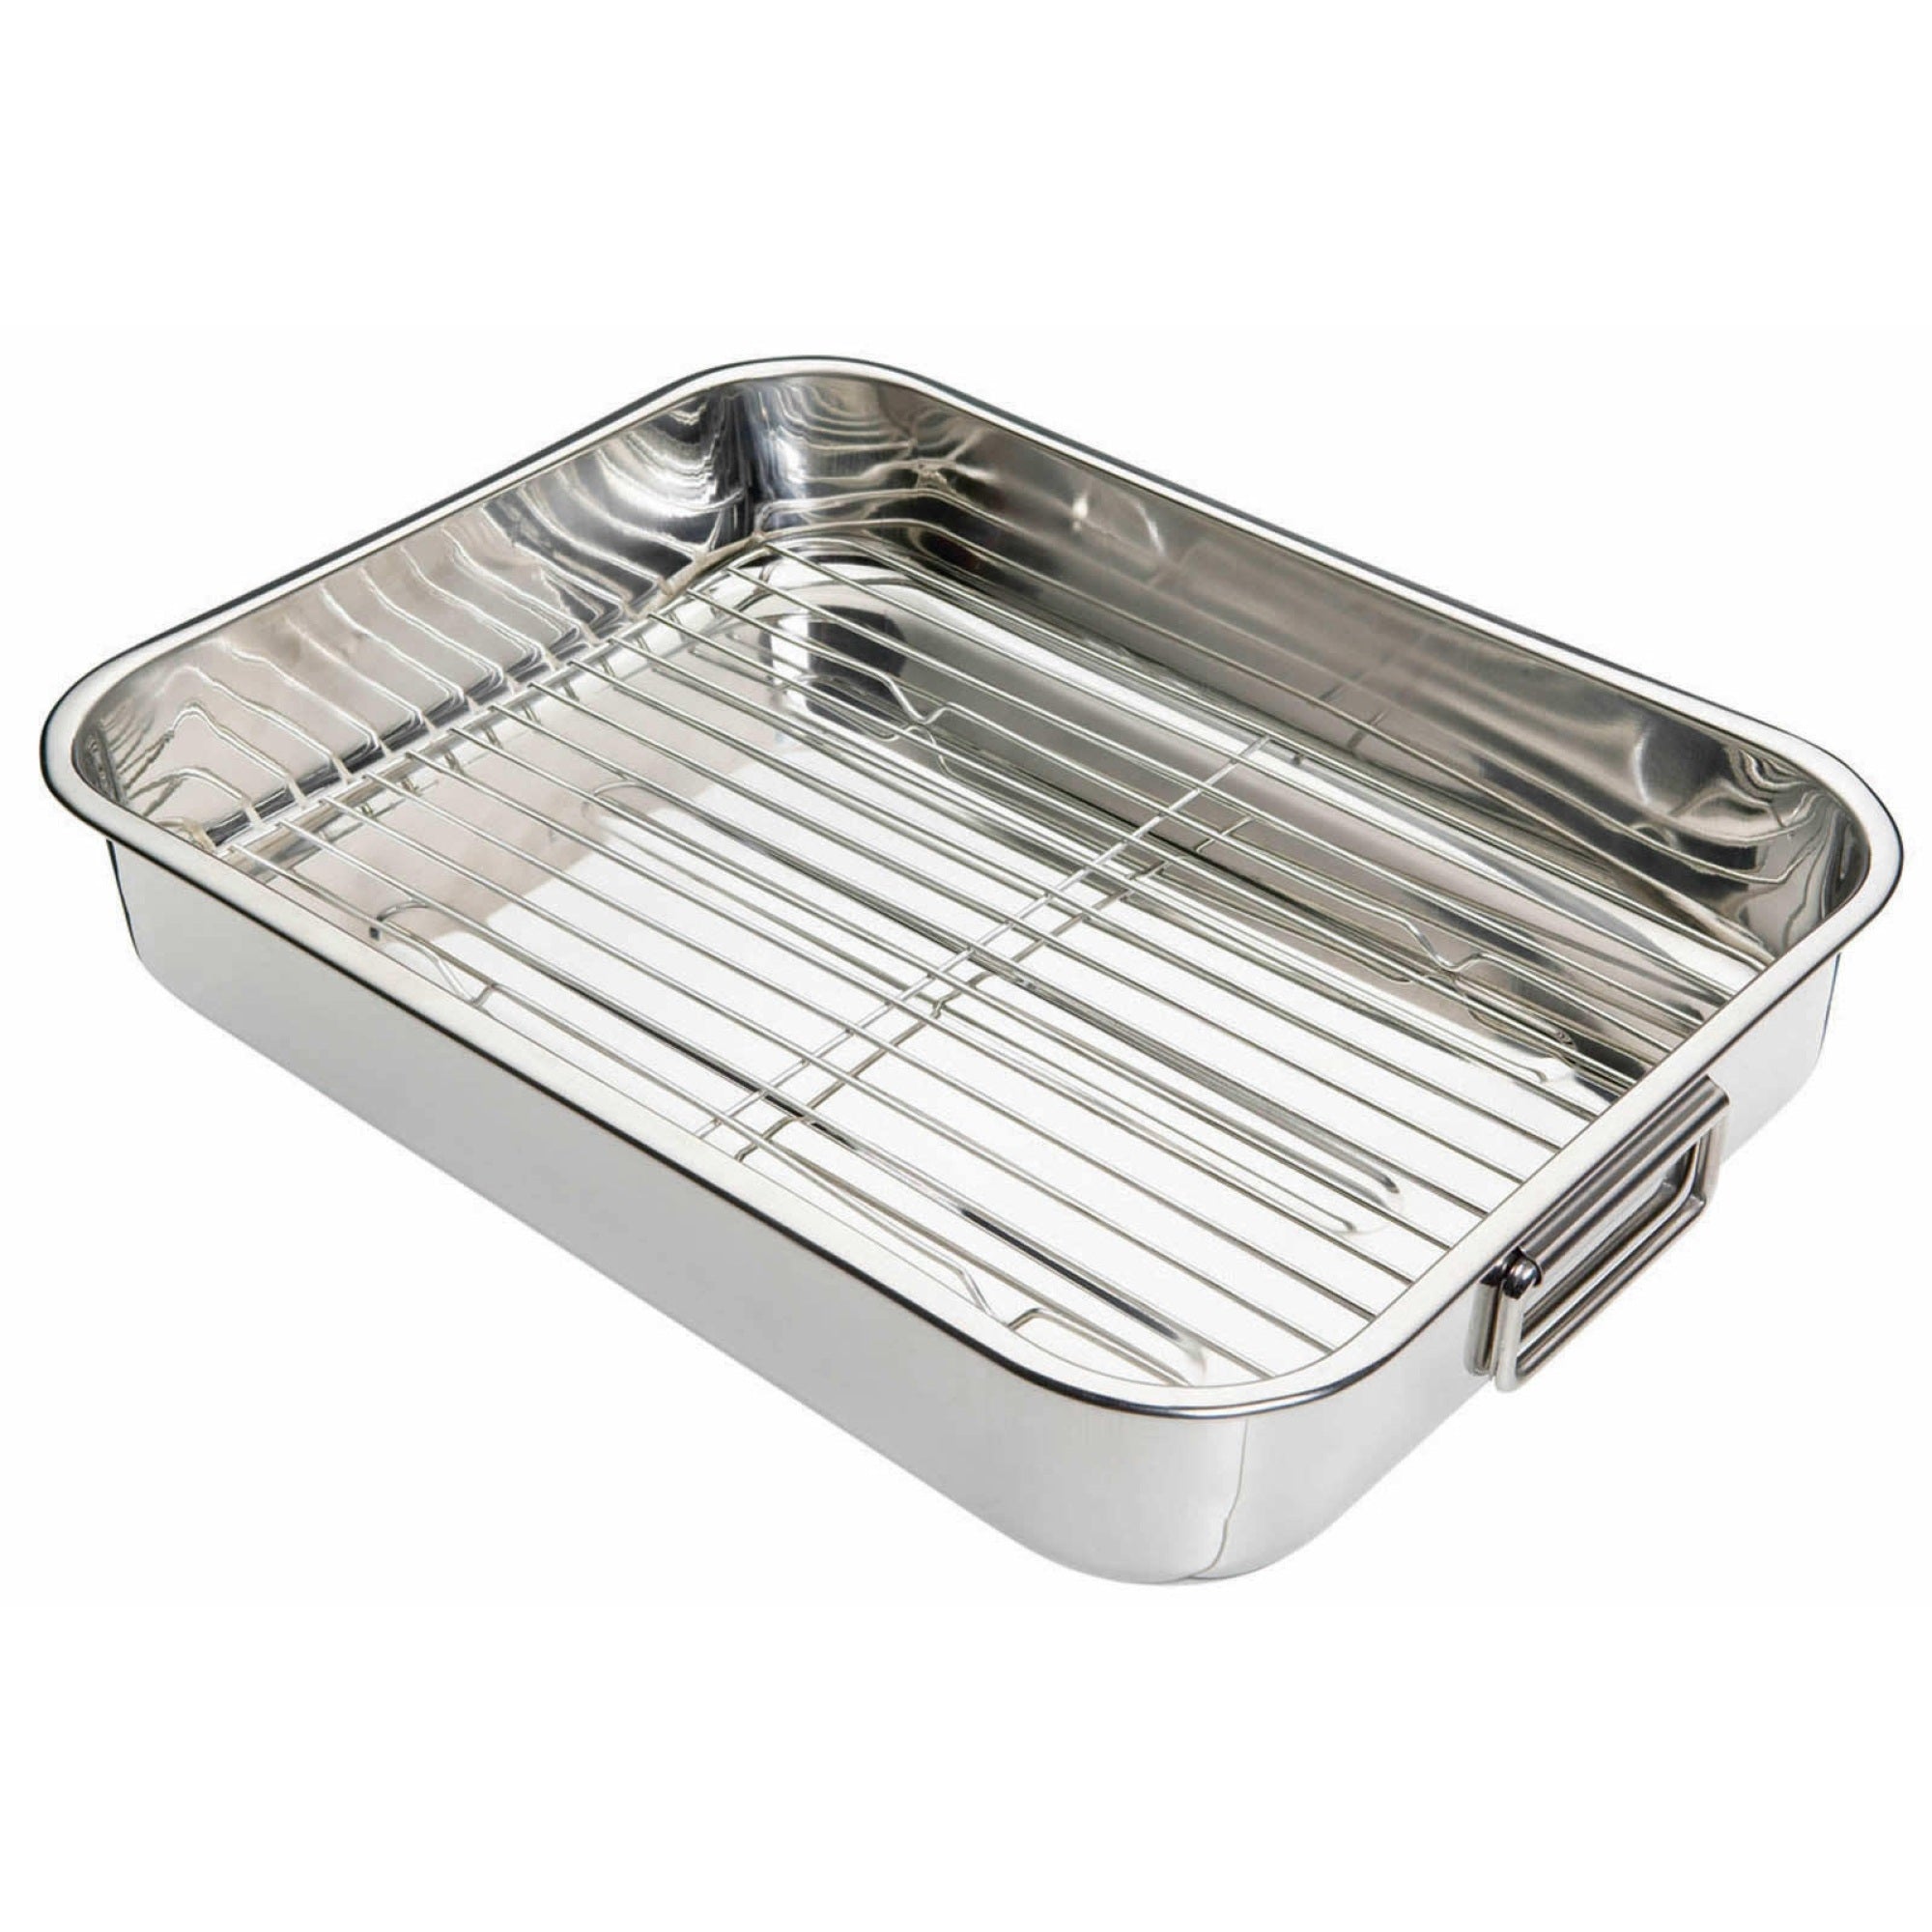 KitchenCraft Stainless Steel 43cm x 31cm Roasting Pan with Removable Rack - The Cooks Cupboard Ltd